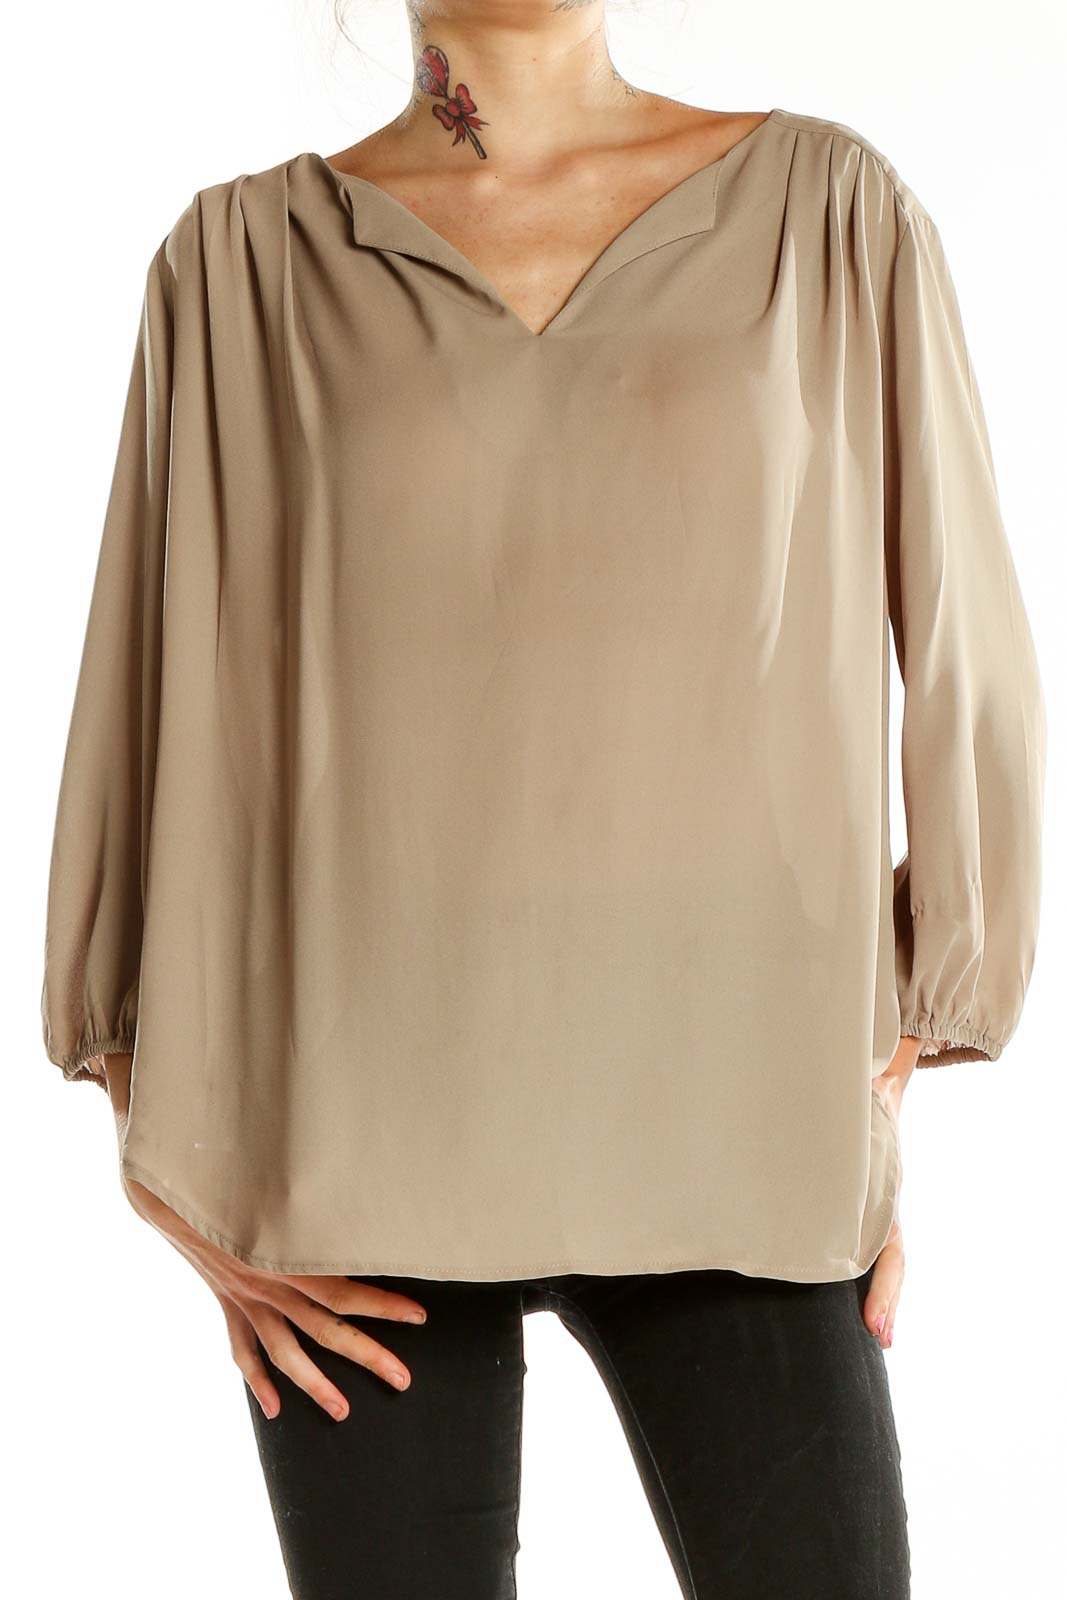 Beige Solid Blouse Front